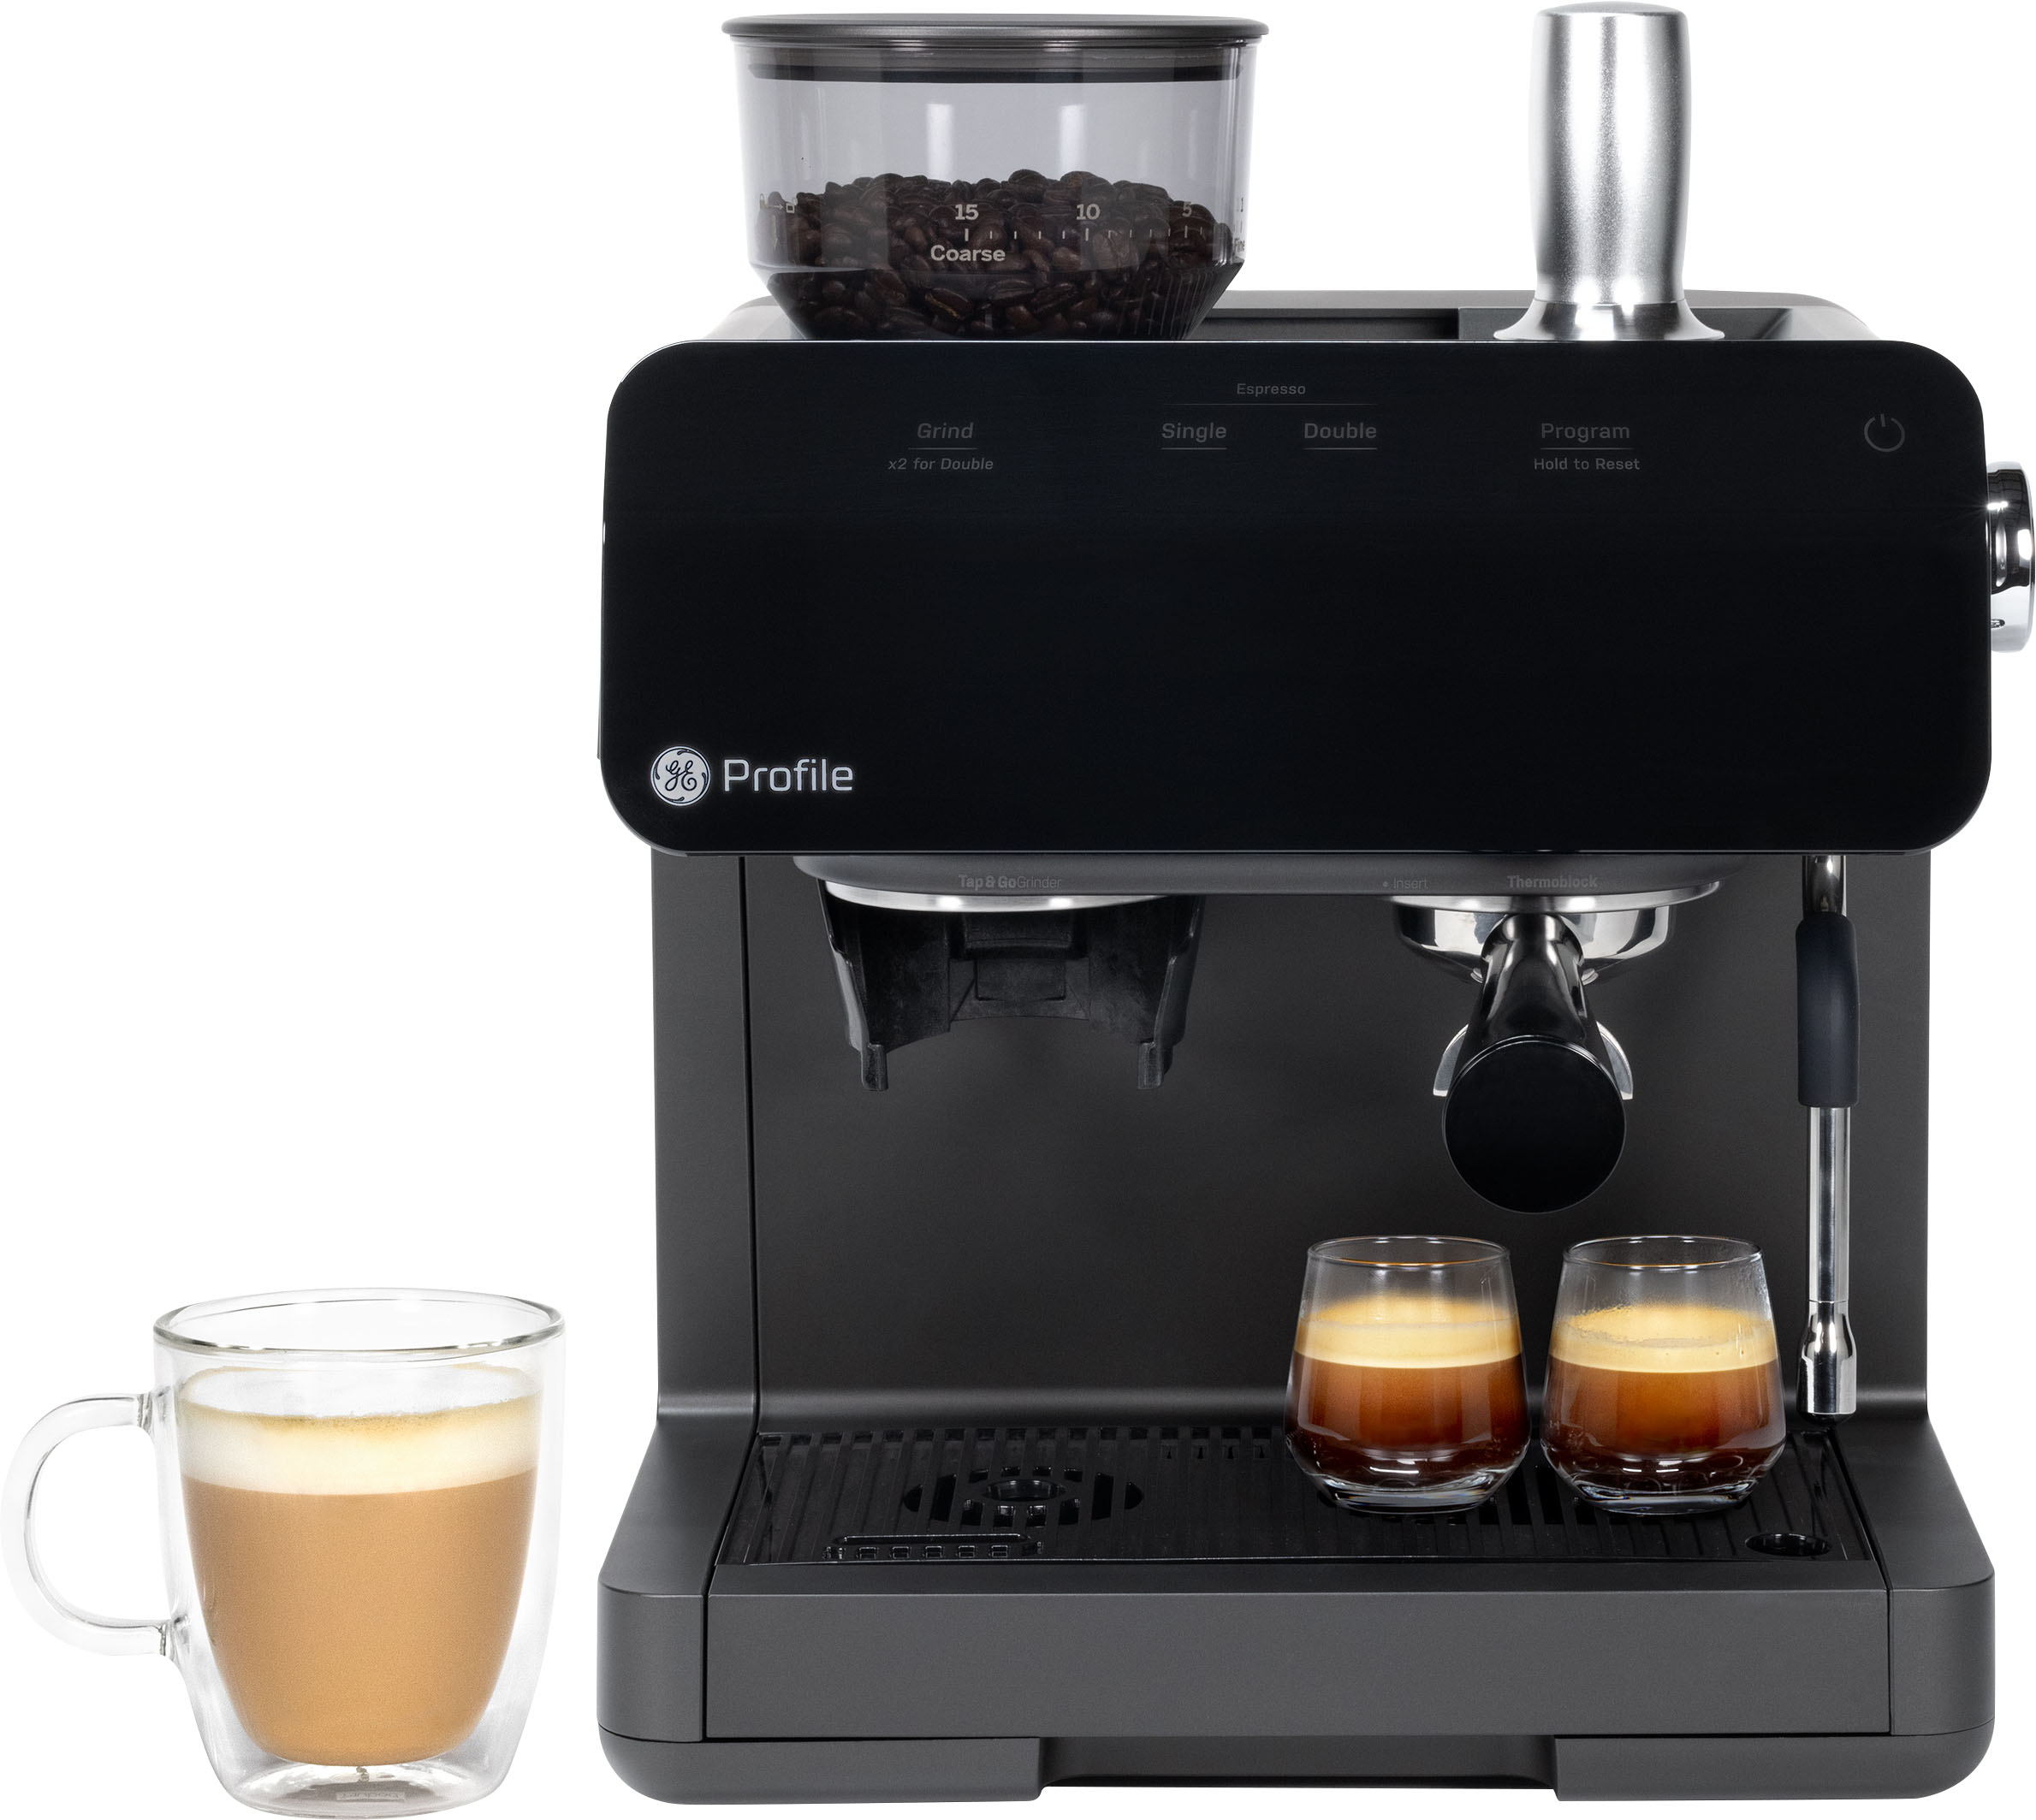 GE Profile Semi-Automatic Espresso Machine with 15 of pressure, Milk Frother, and Built-In Wi-Fi Black P7CESAS6RBB - Best Buy